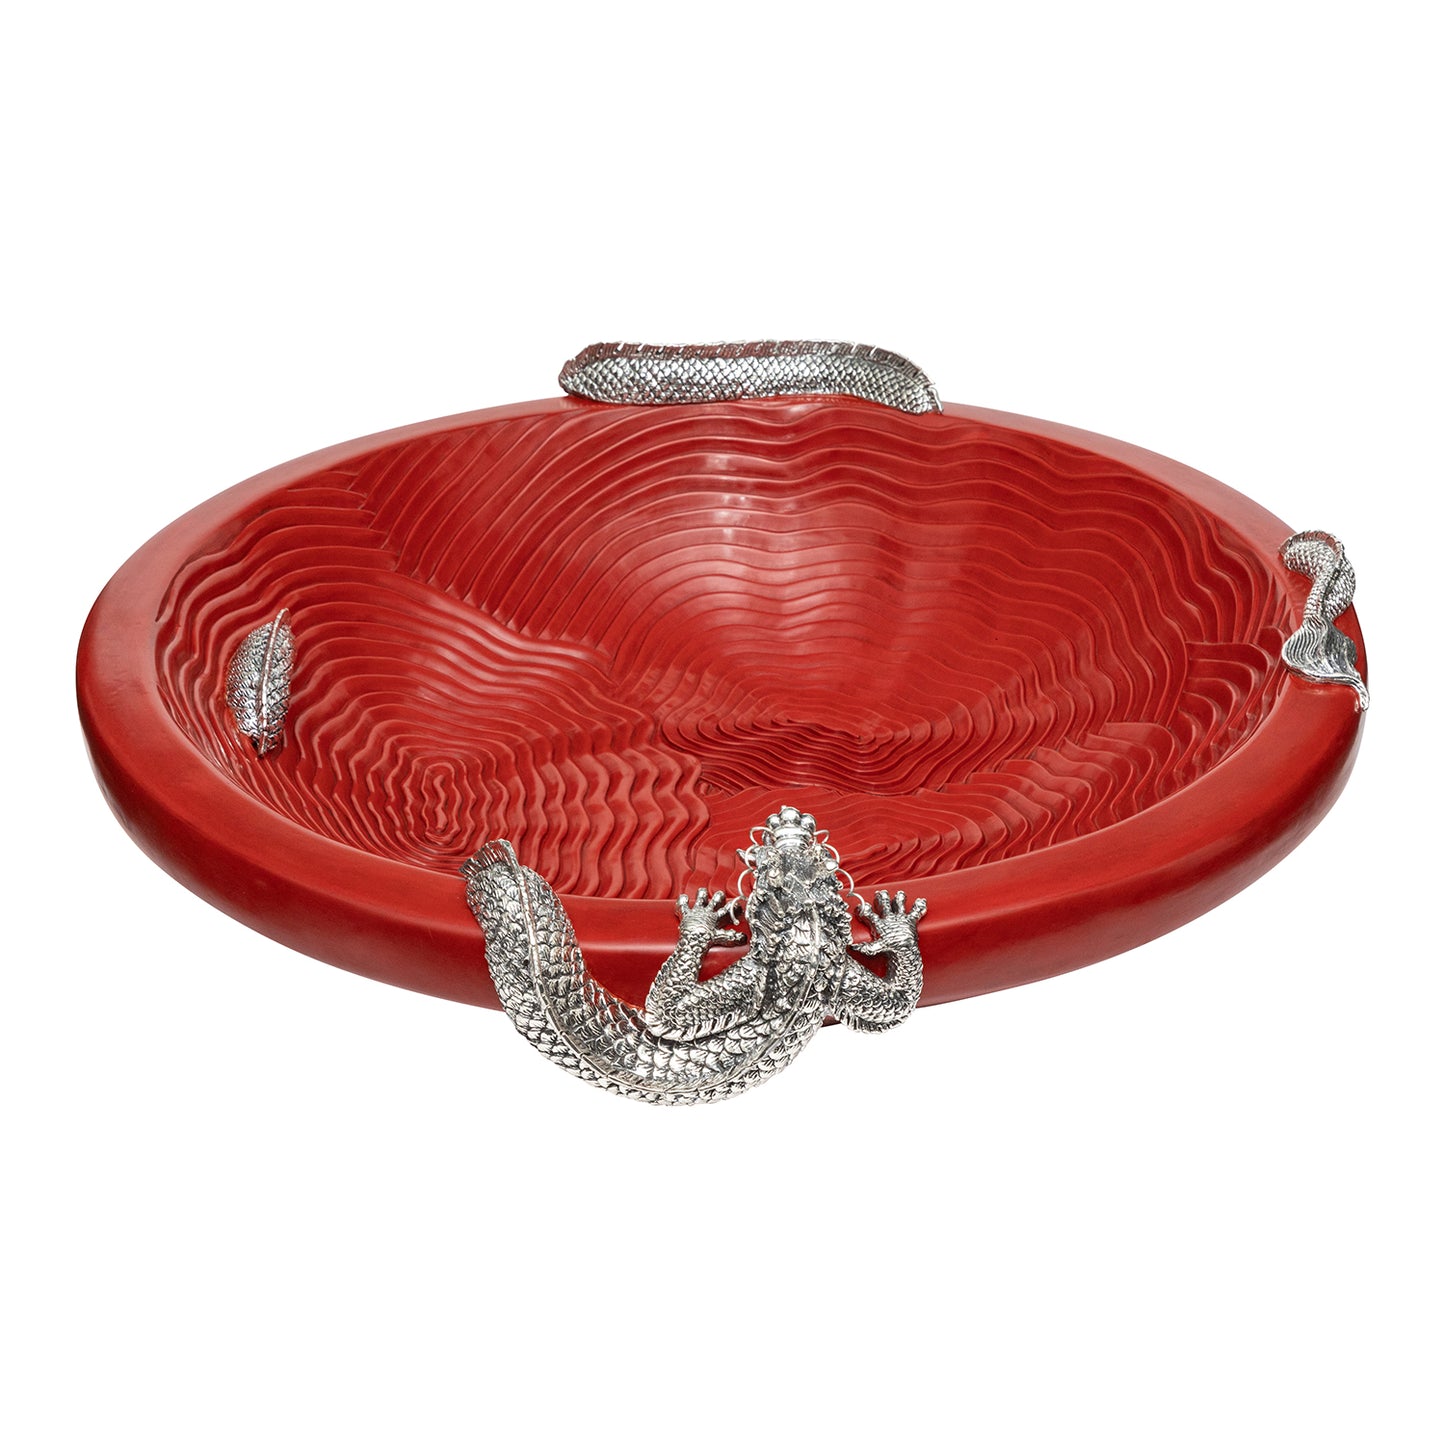 Cinnabar Lacquer Bowl with Dancing Dragons (L)